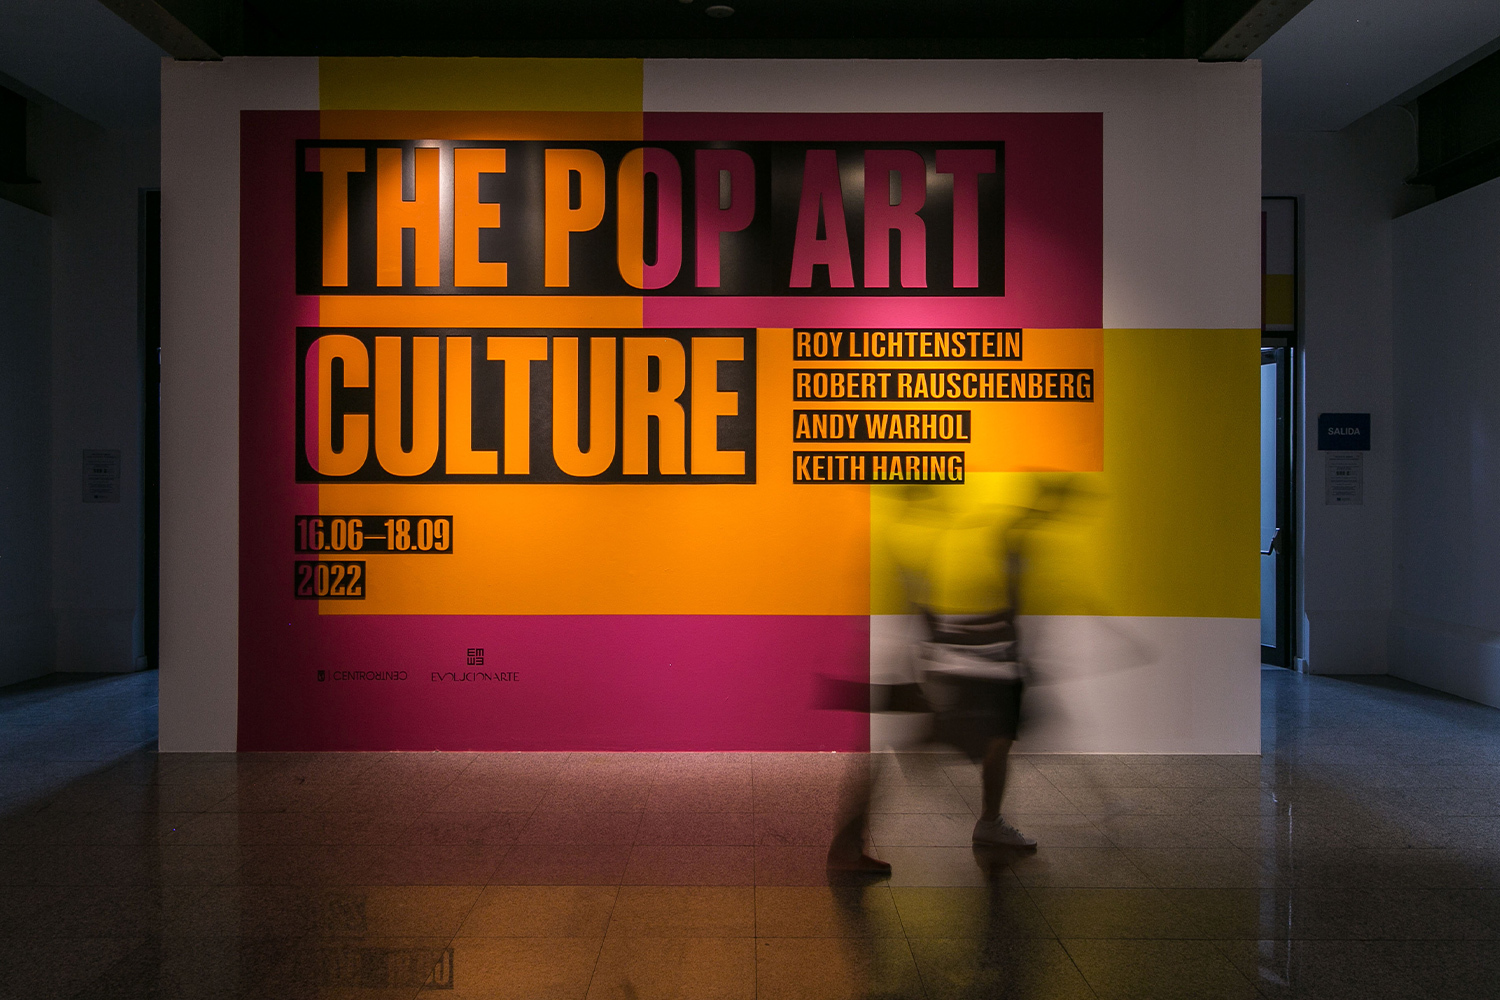 “The Pop Art Culture”, at CentroCentro